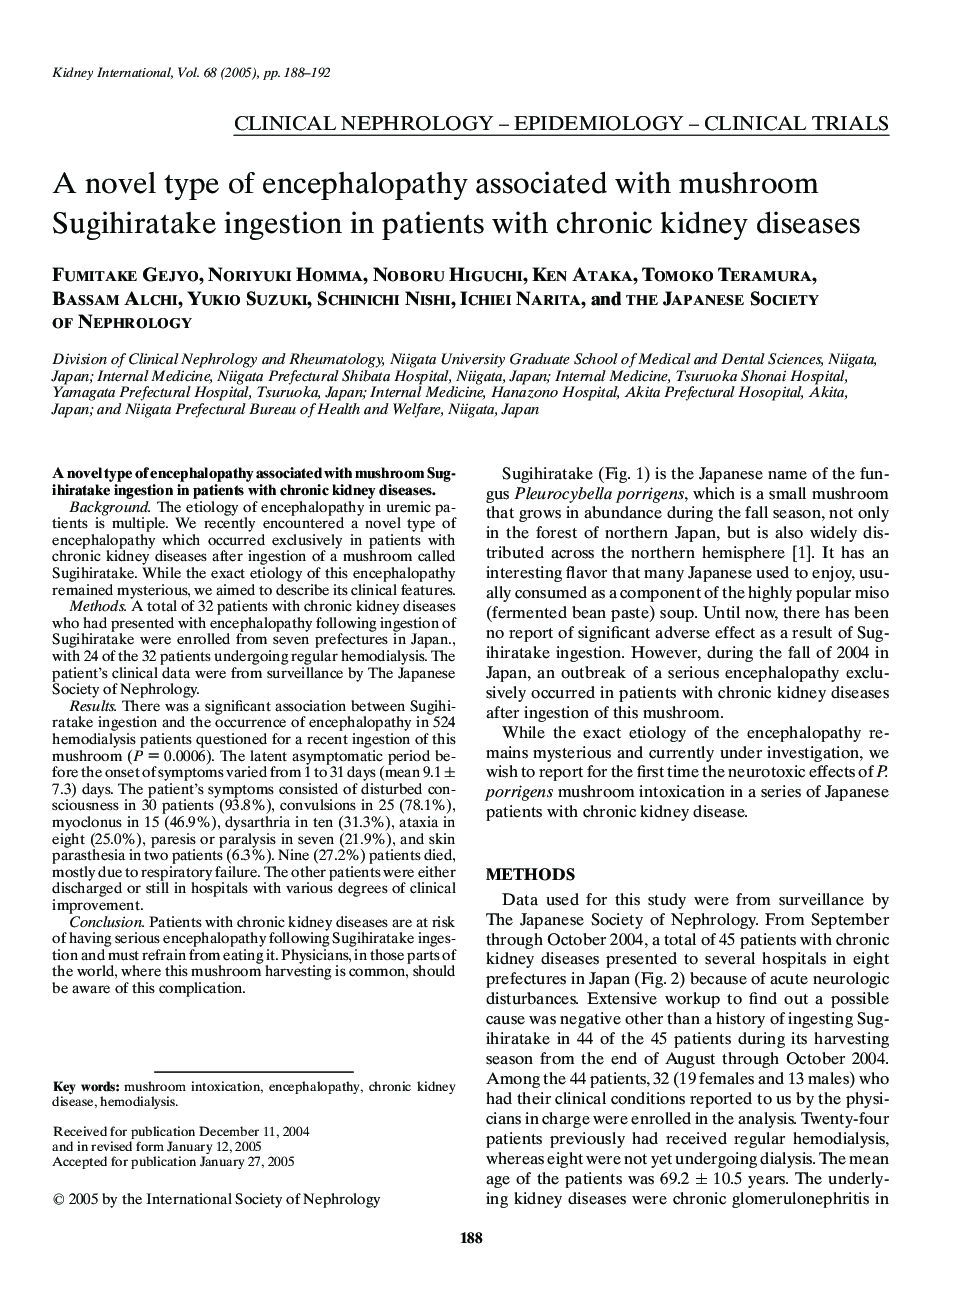 A novel type of encephalopathy associated with mushroom Sugihiratake ingestion in patients with chronic kidney diseases